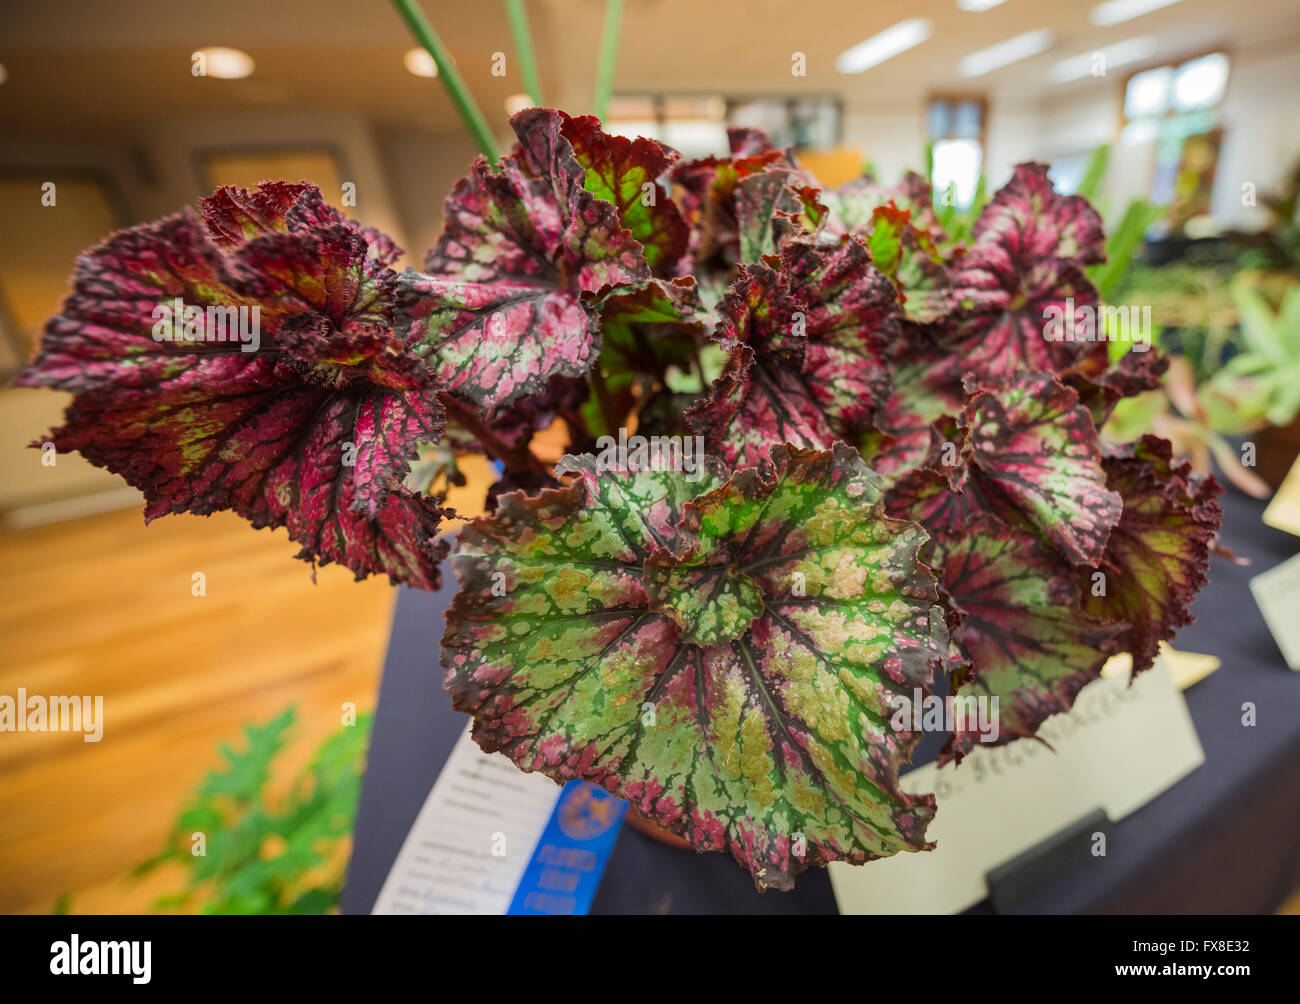 Spring garden festival in North Central Florida. A Rex begonia on display at the flower arrangement show area. Stock Photo